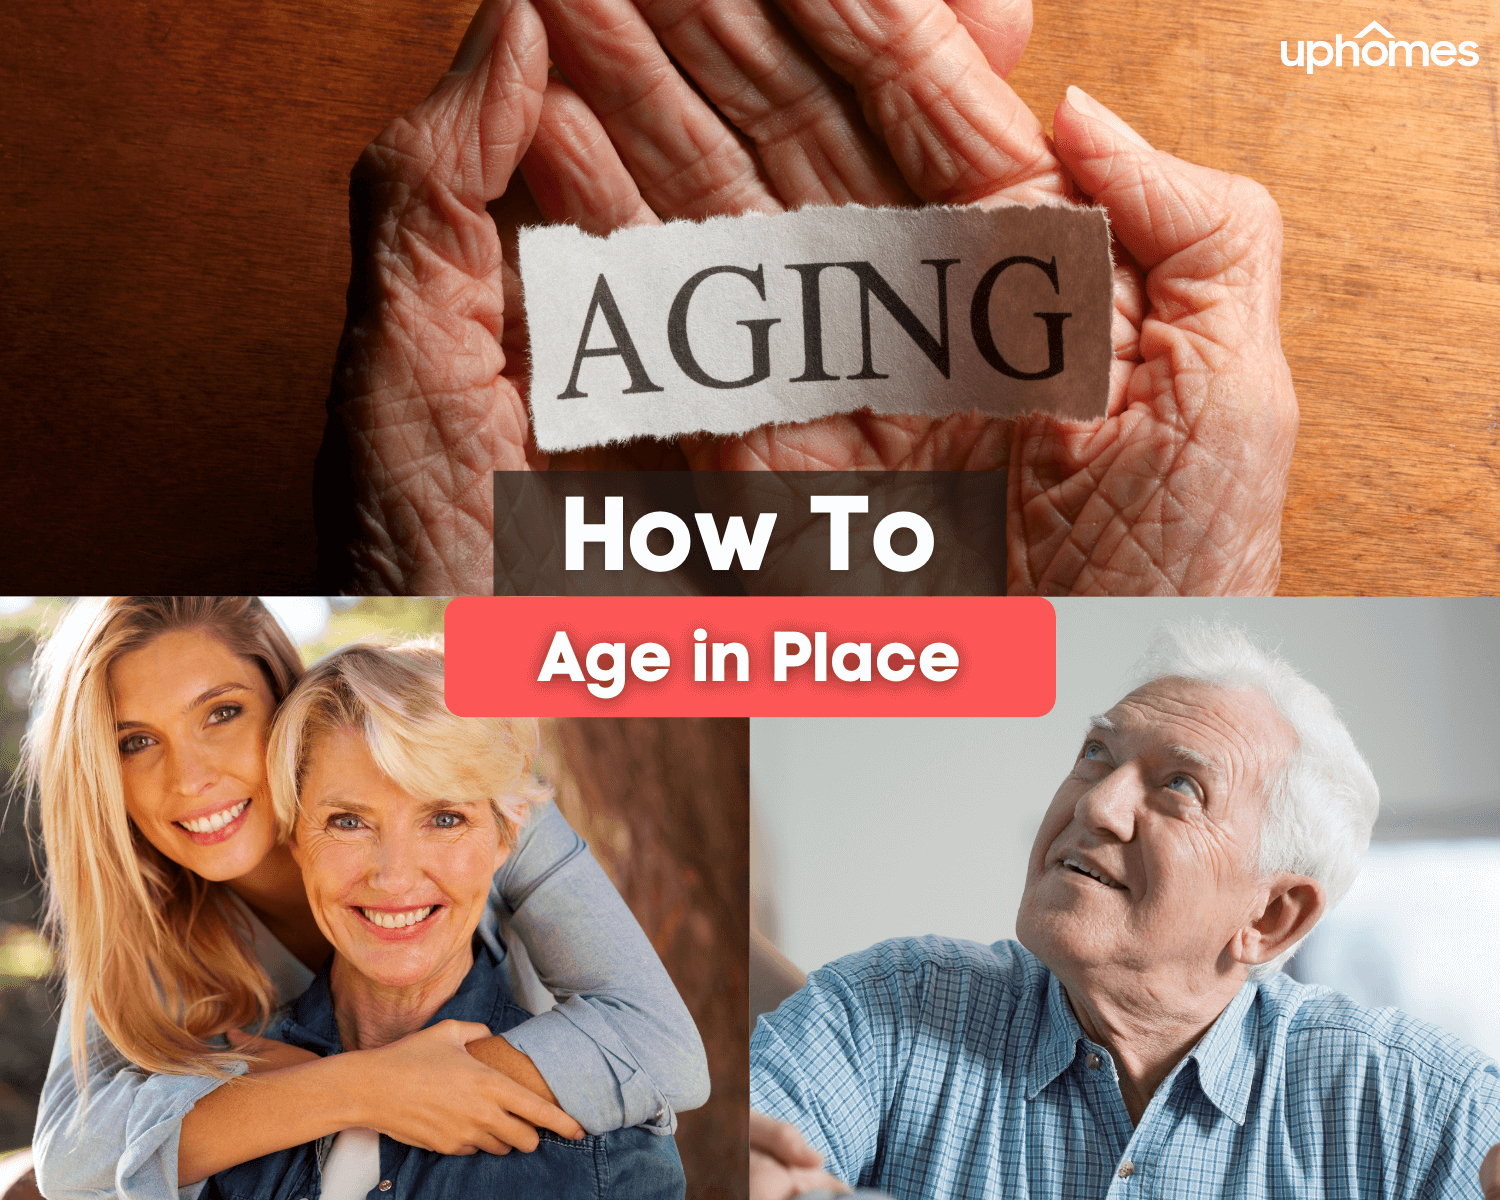 How to Age in Place - Aging at Home with family and with help from others